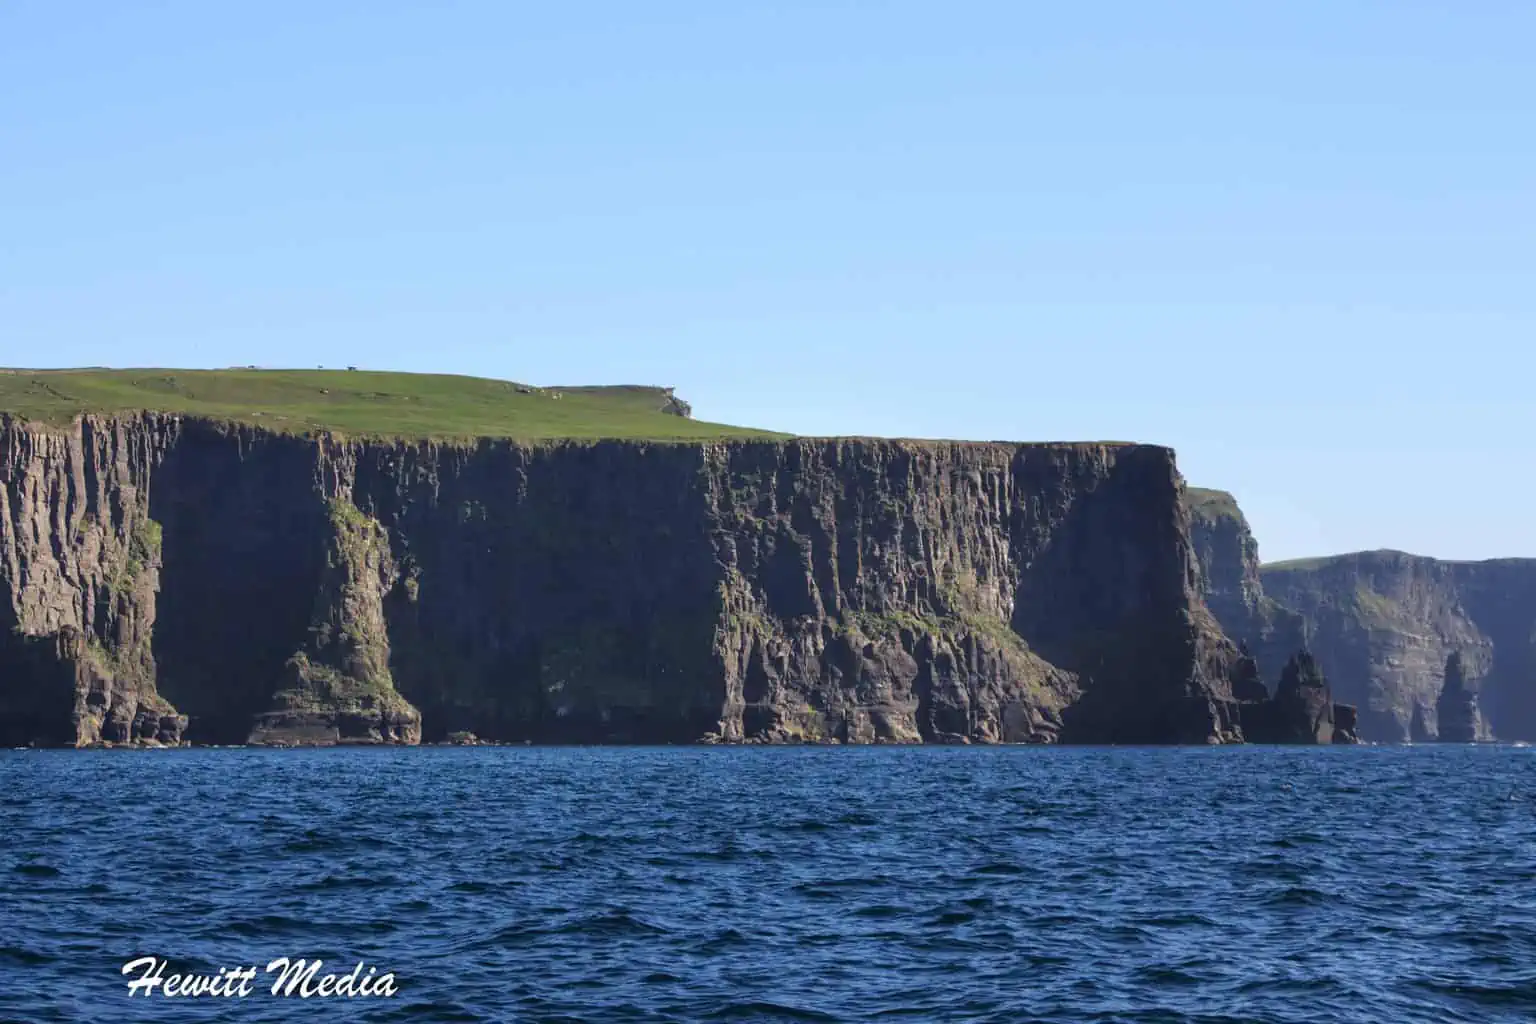 Cliffs of Moher Visitor's Guide